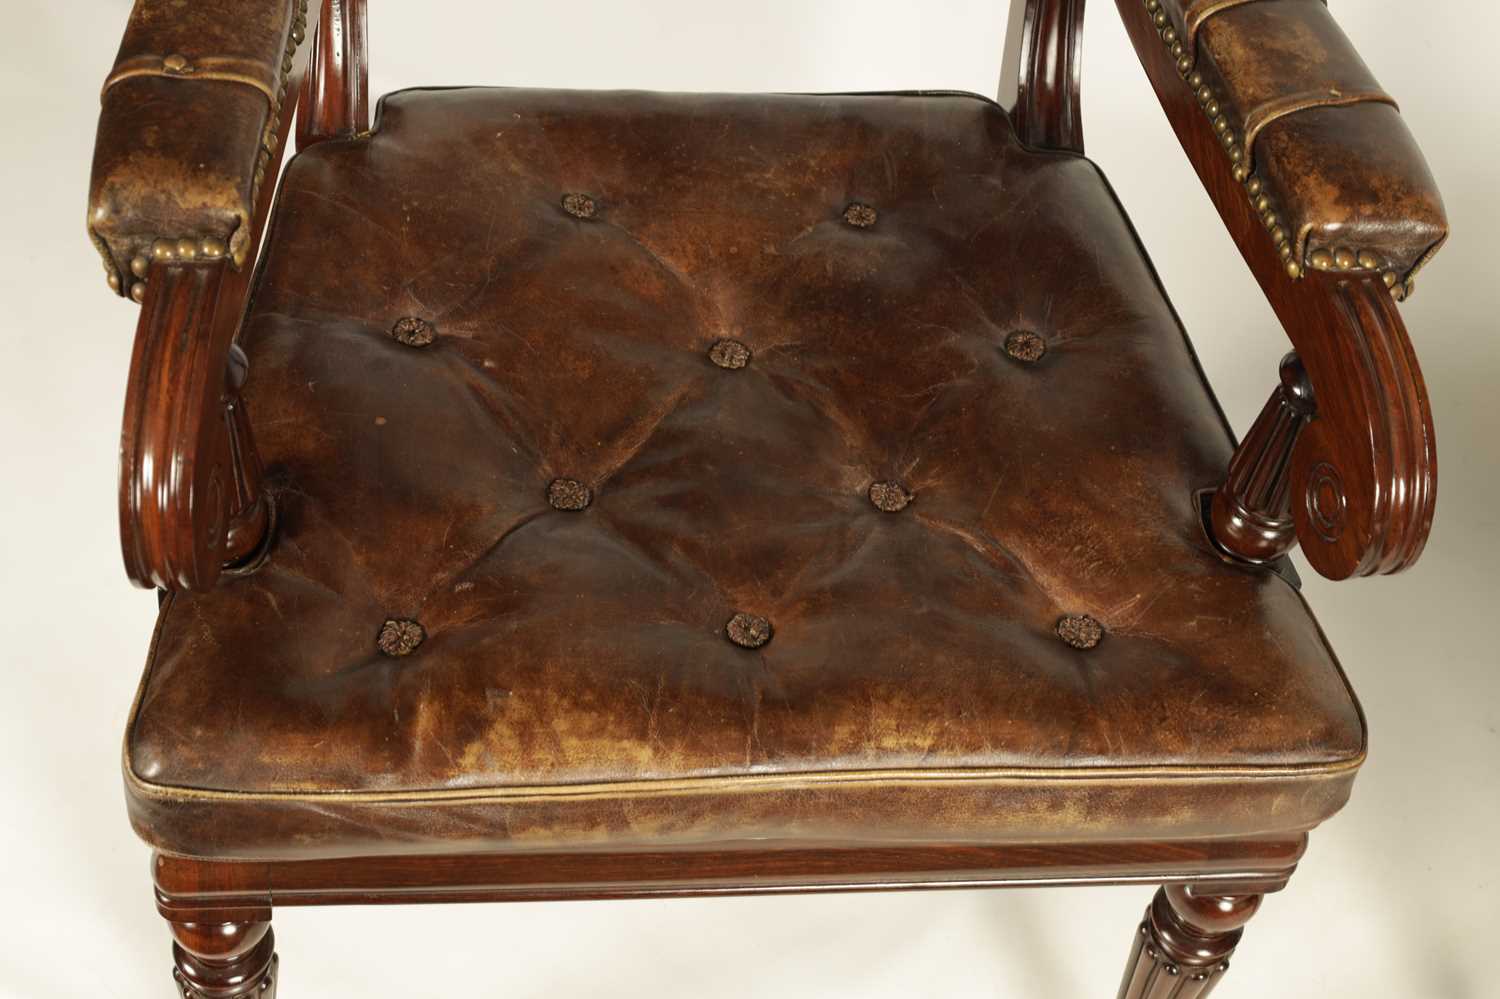 A GOOD PAIR OF REGENCY STYLE MAHOGANY DESK CHAIRS IN THE MANNER OF GILLOWS - Image 4 of 10